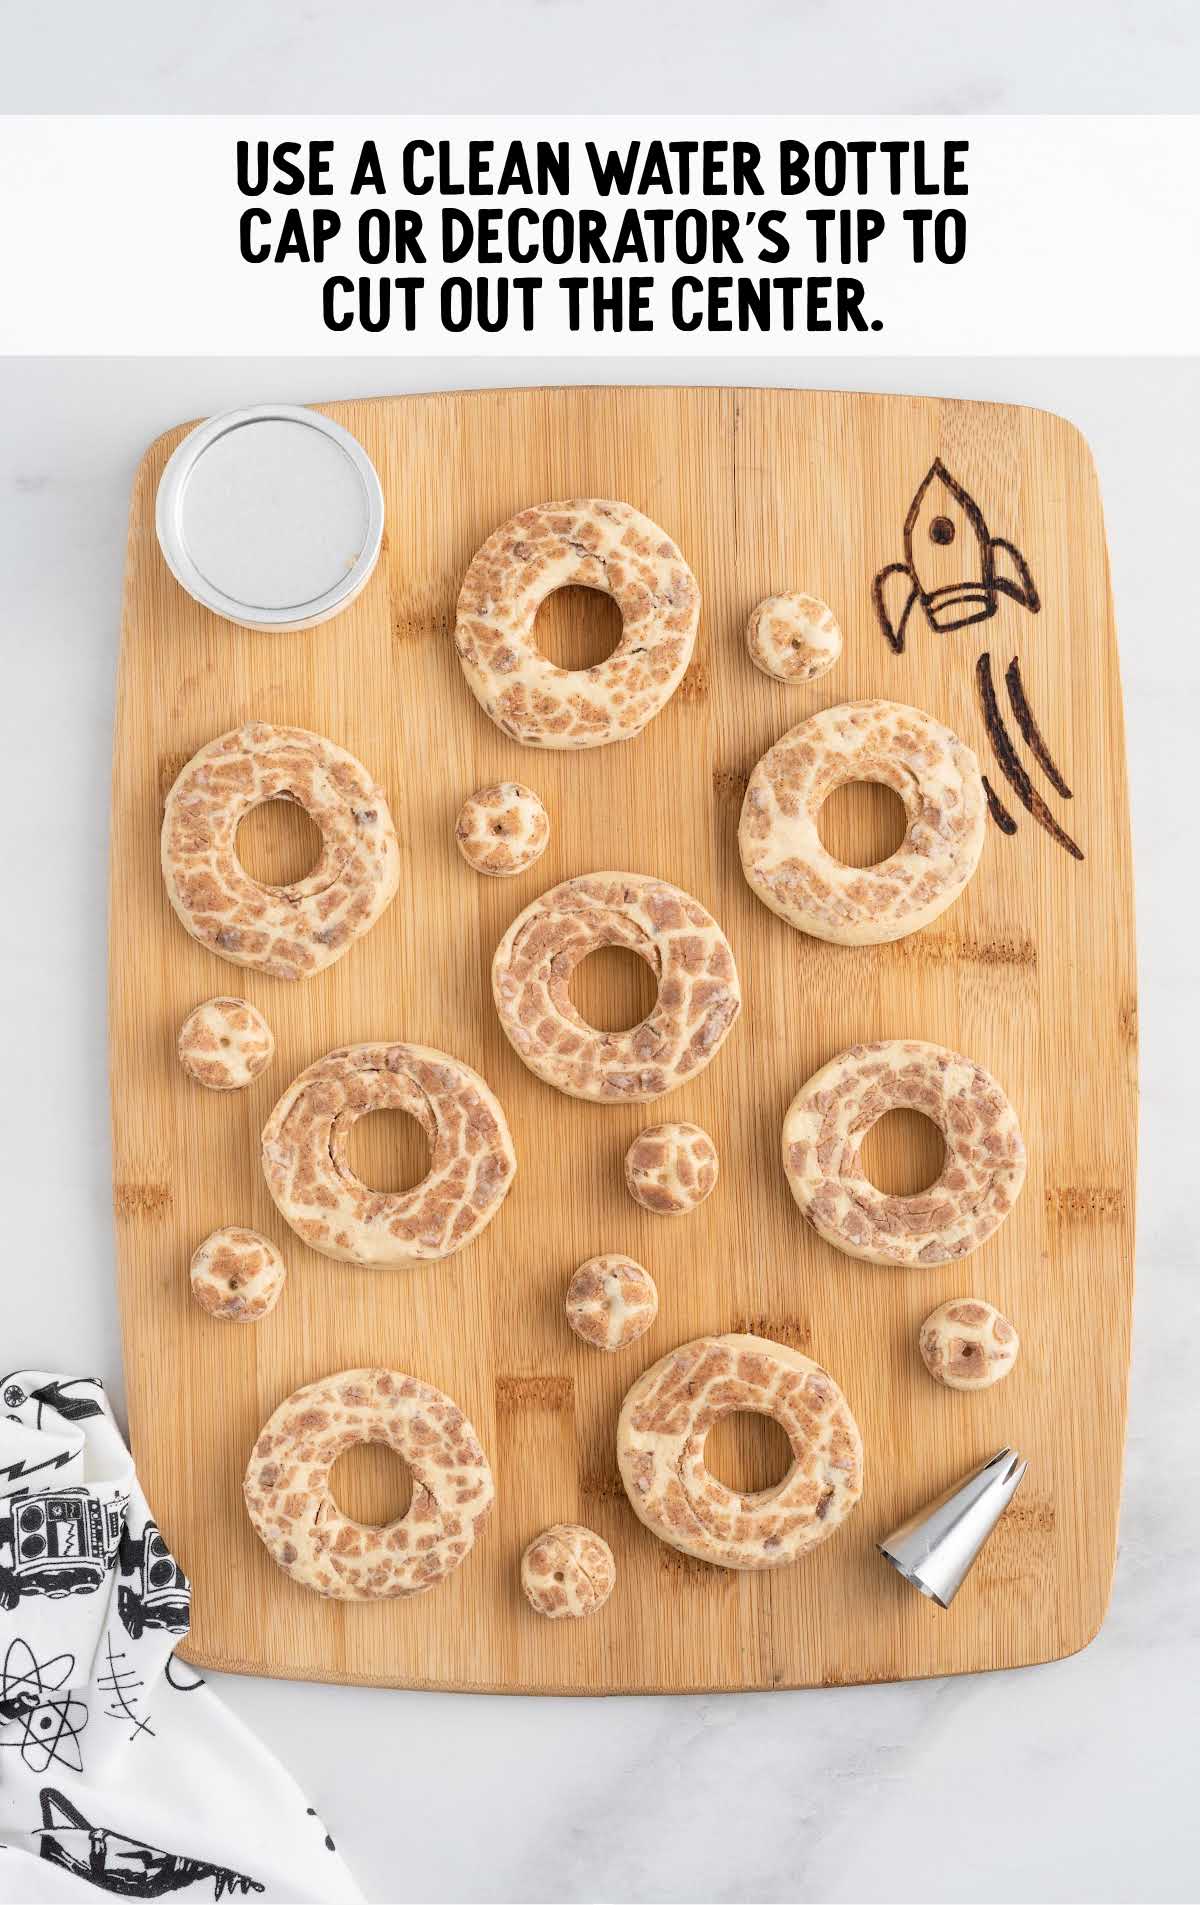 cut out the center of the donut by using a water bottle cap on a wooden cutting board